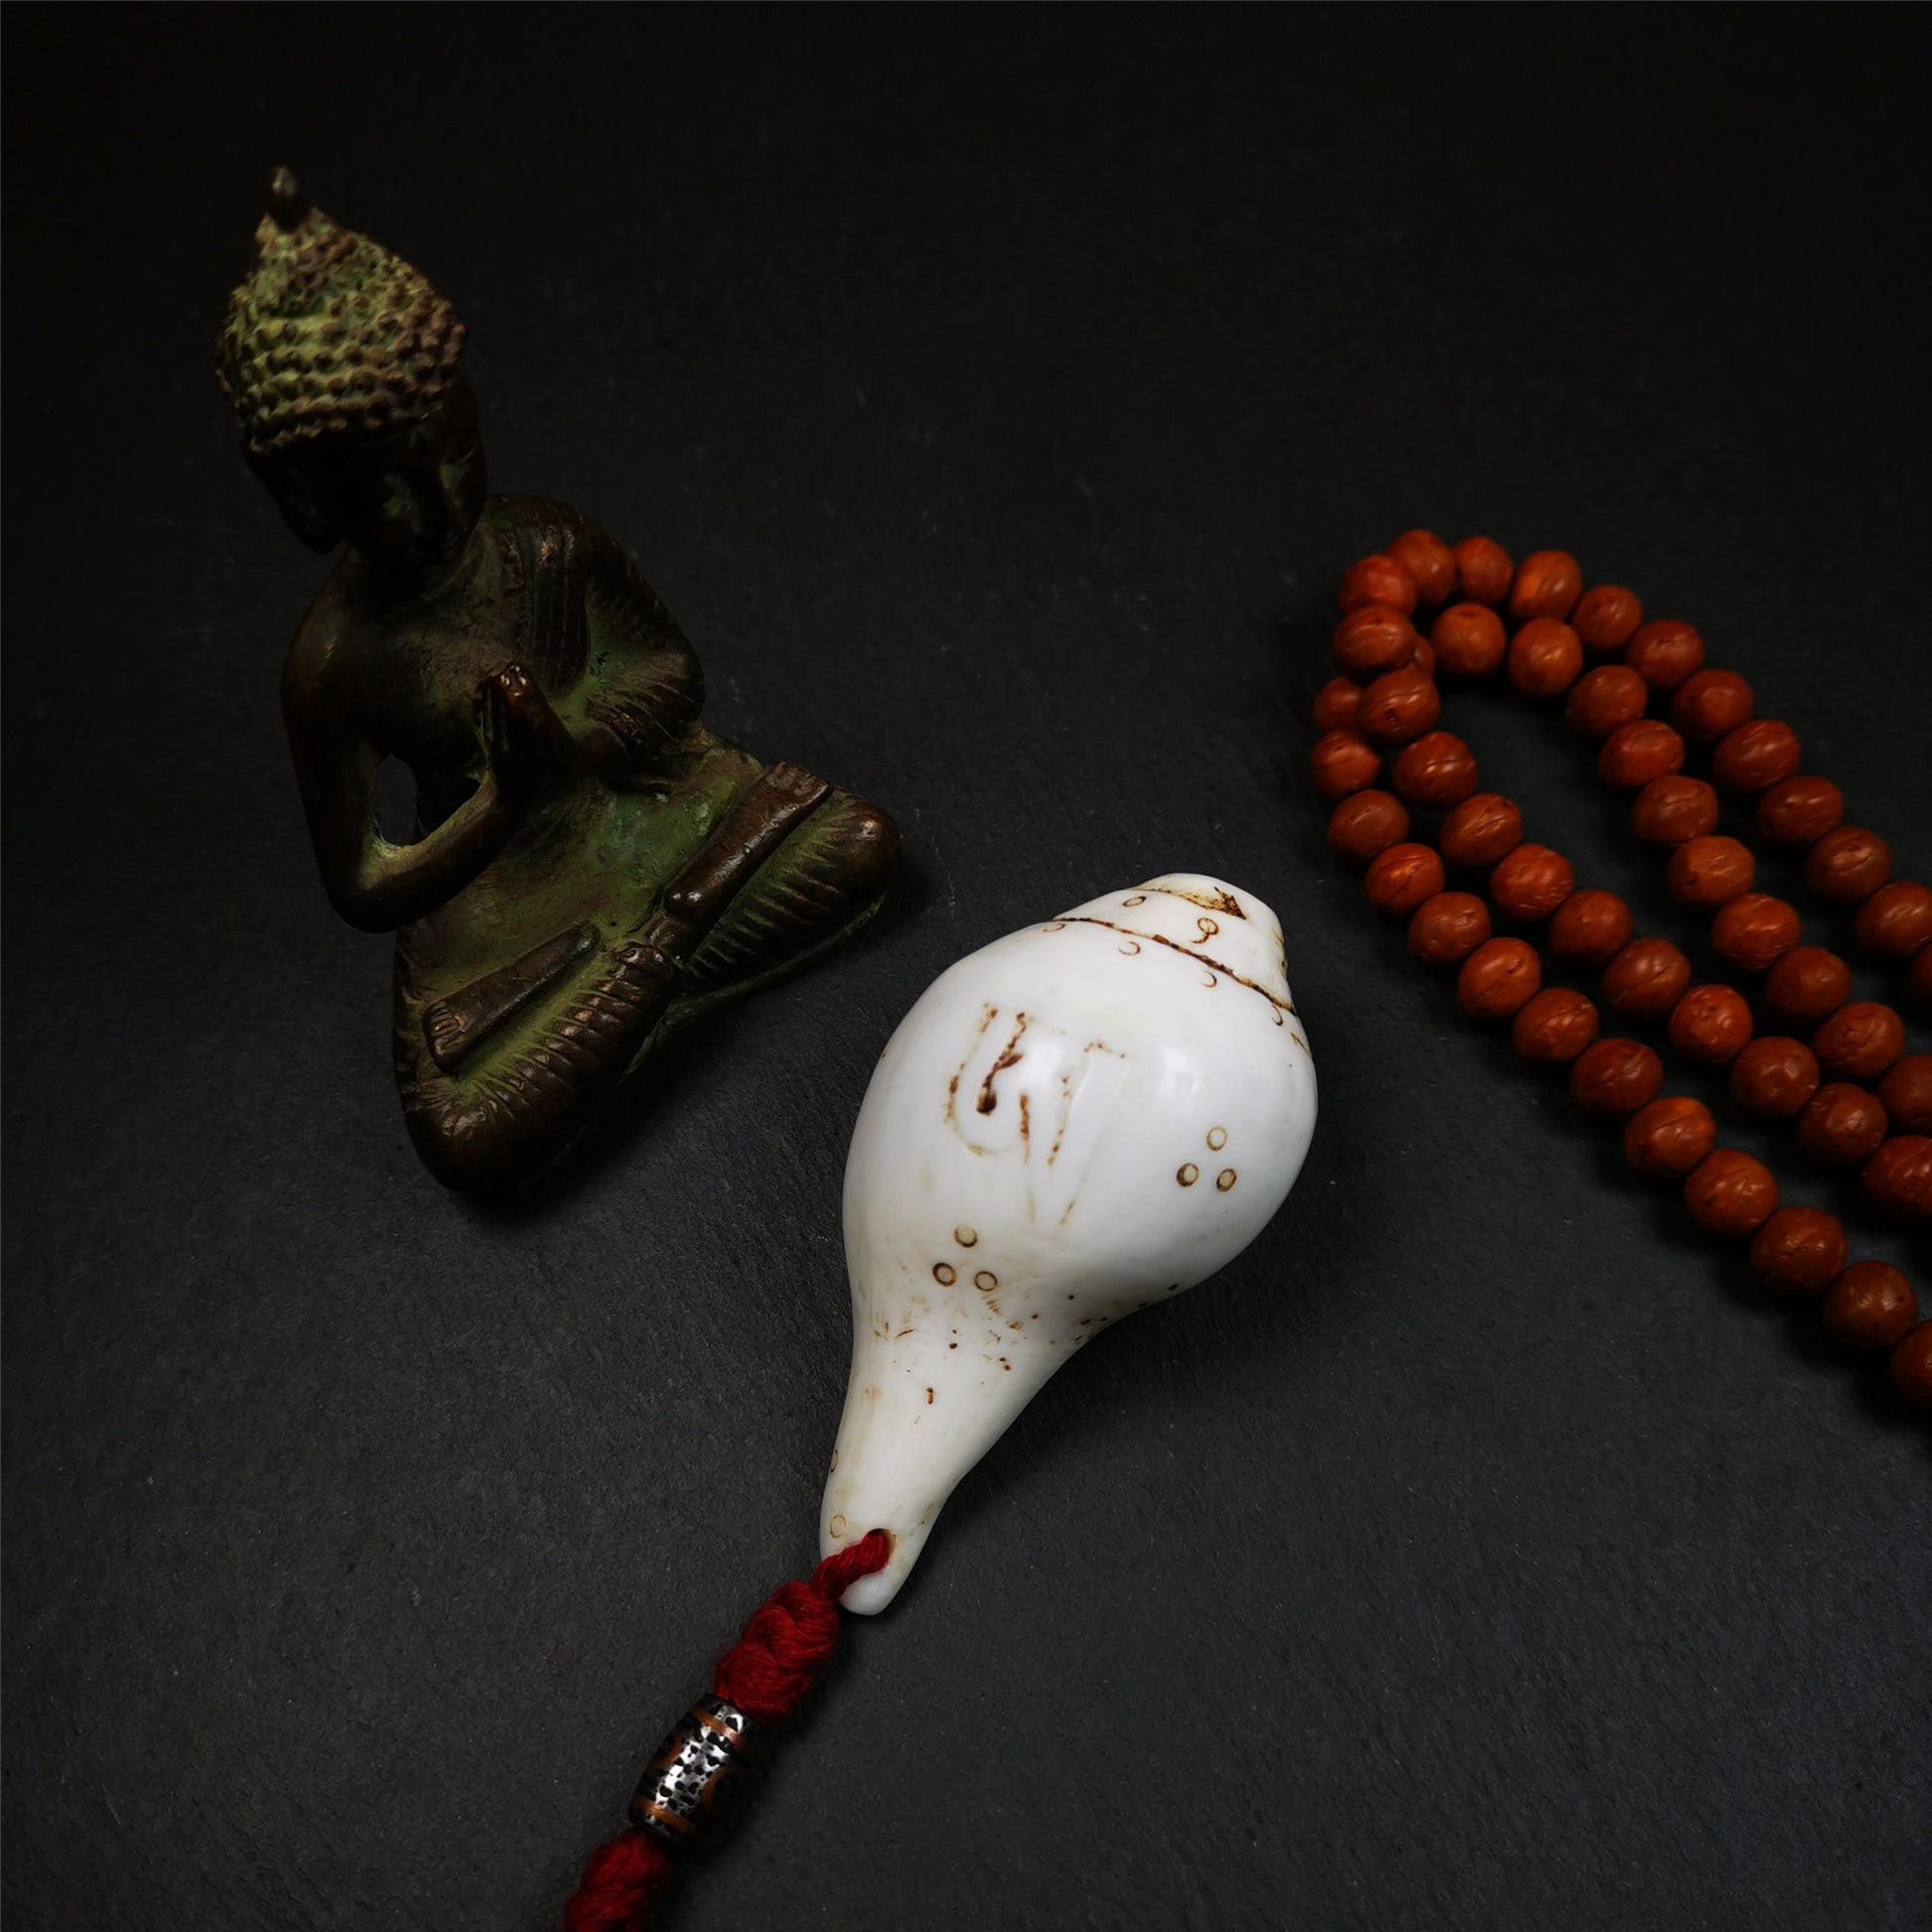 This conch ritual was hand carved by Tibetan craftsmen,collected from Gengqing Monastery,about 40 years old. It's made of conch, entirely hand-carved with tibetan letter OM and mantra dots,and there is an iron dzi bead hanging at the tail,very beautiful.